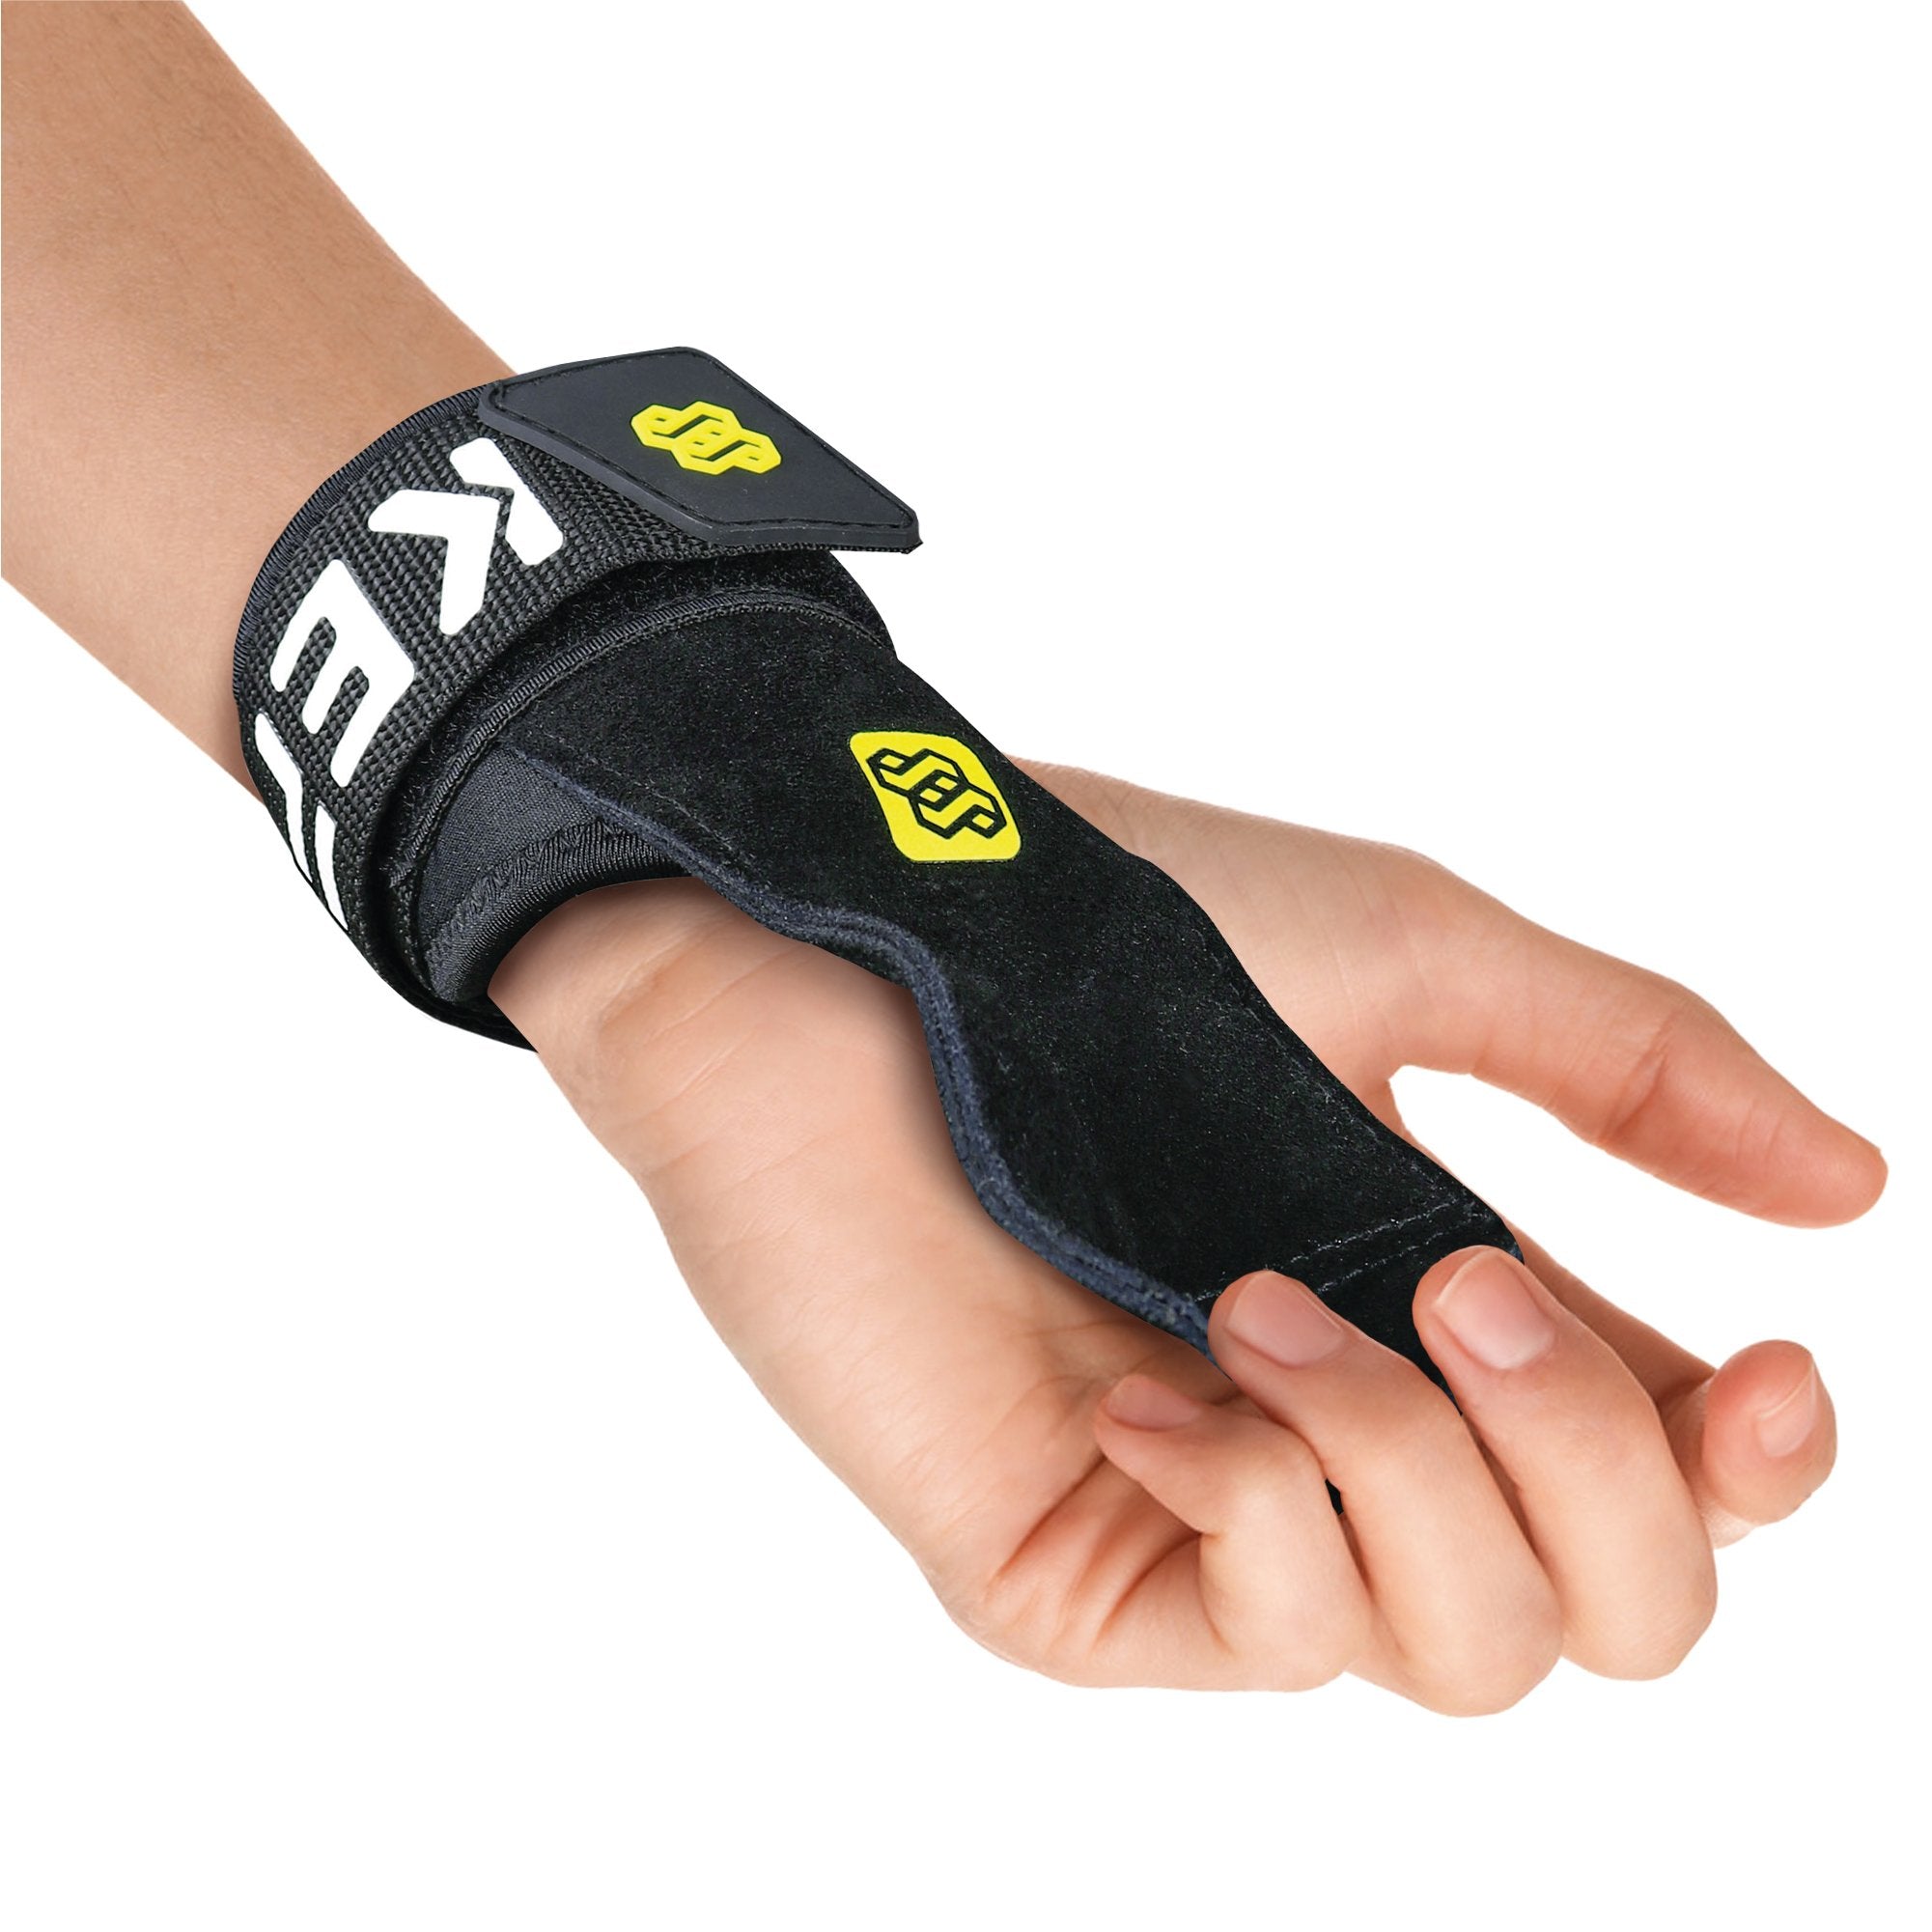 Weight Lifting Palm Pad support - KEFLUK